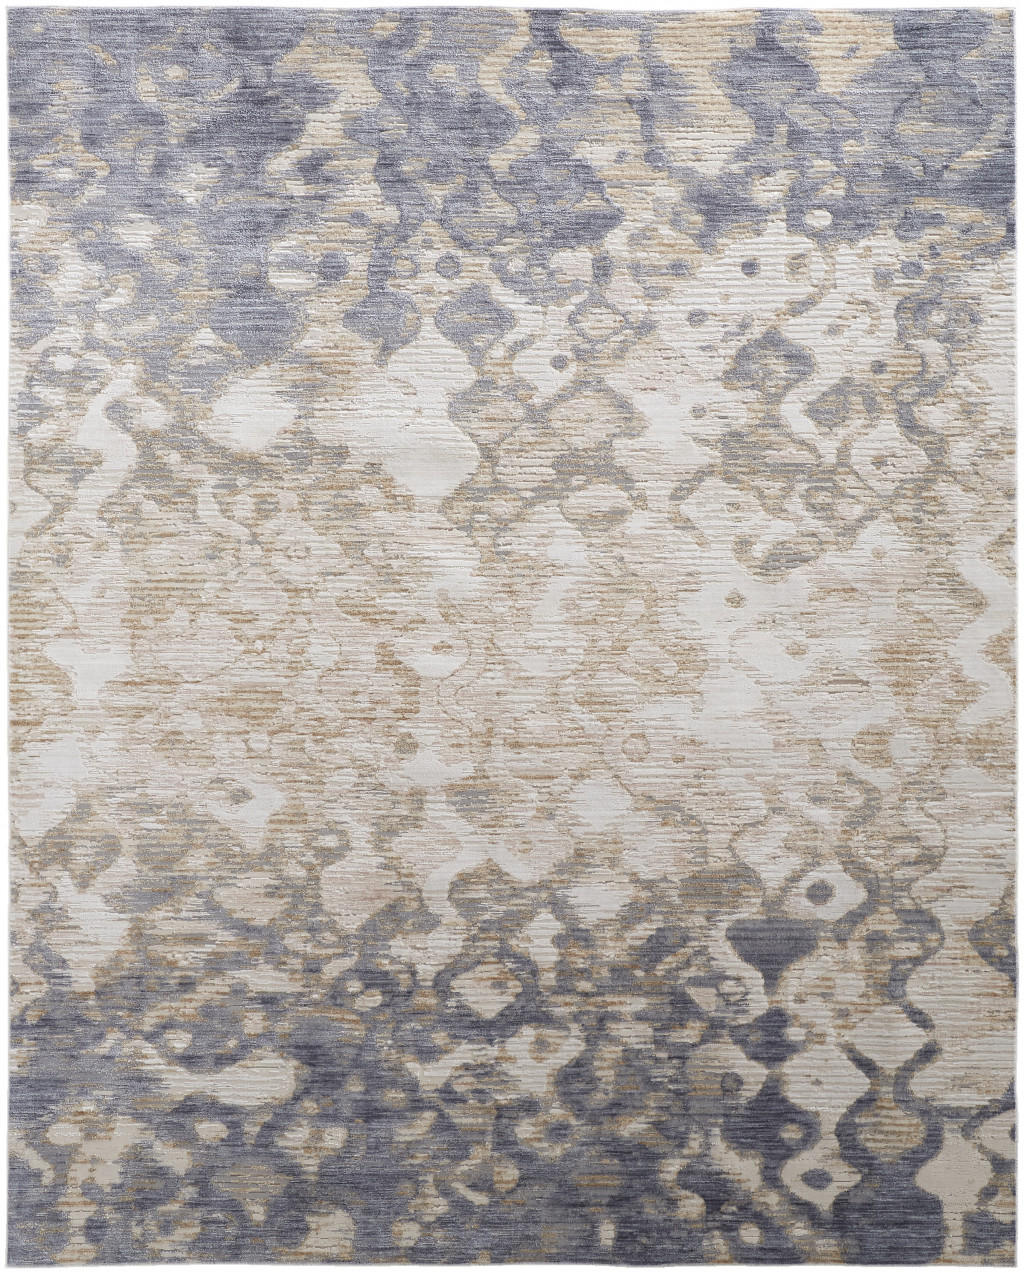 5' X 8' Tan Ivory And Blue Abstract Power Loom Distressed Area Rug-514159-1